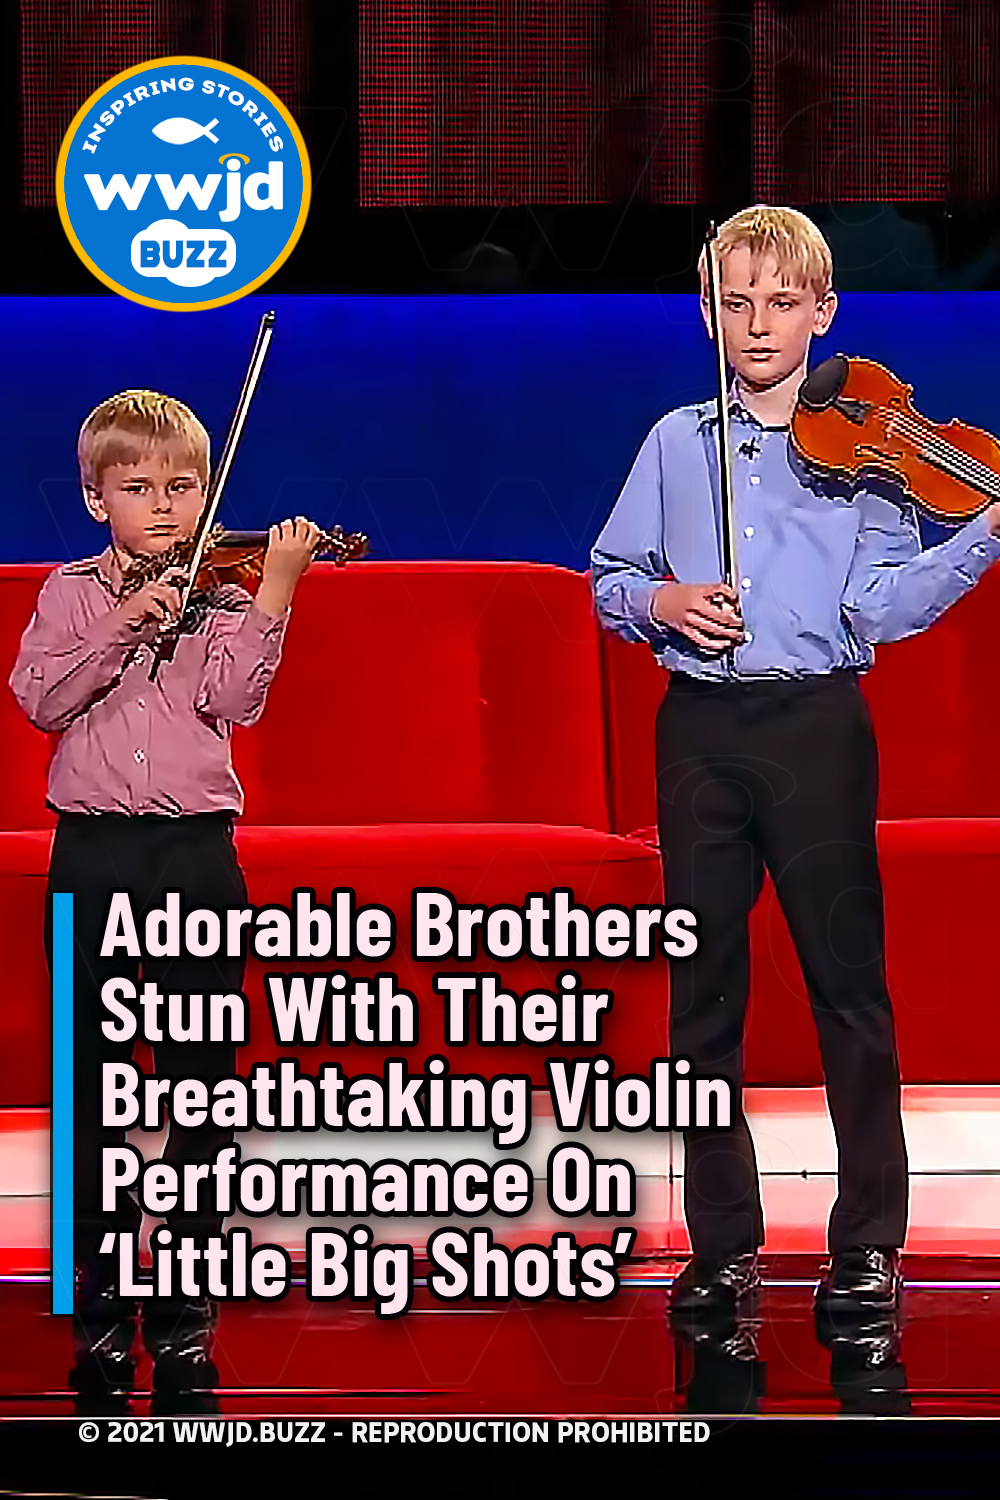 Adorable Brothers Stun With Their Breathtaking Violin Performance On ‘Little Big Shots’